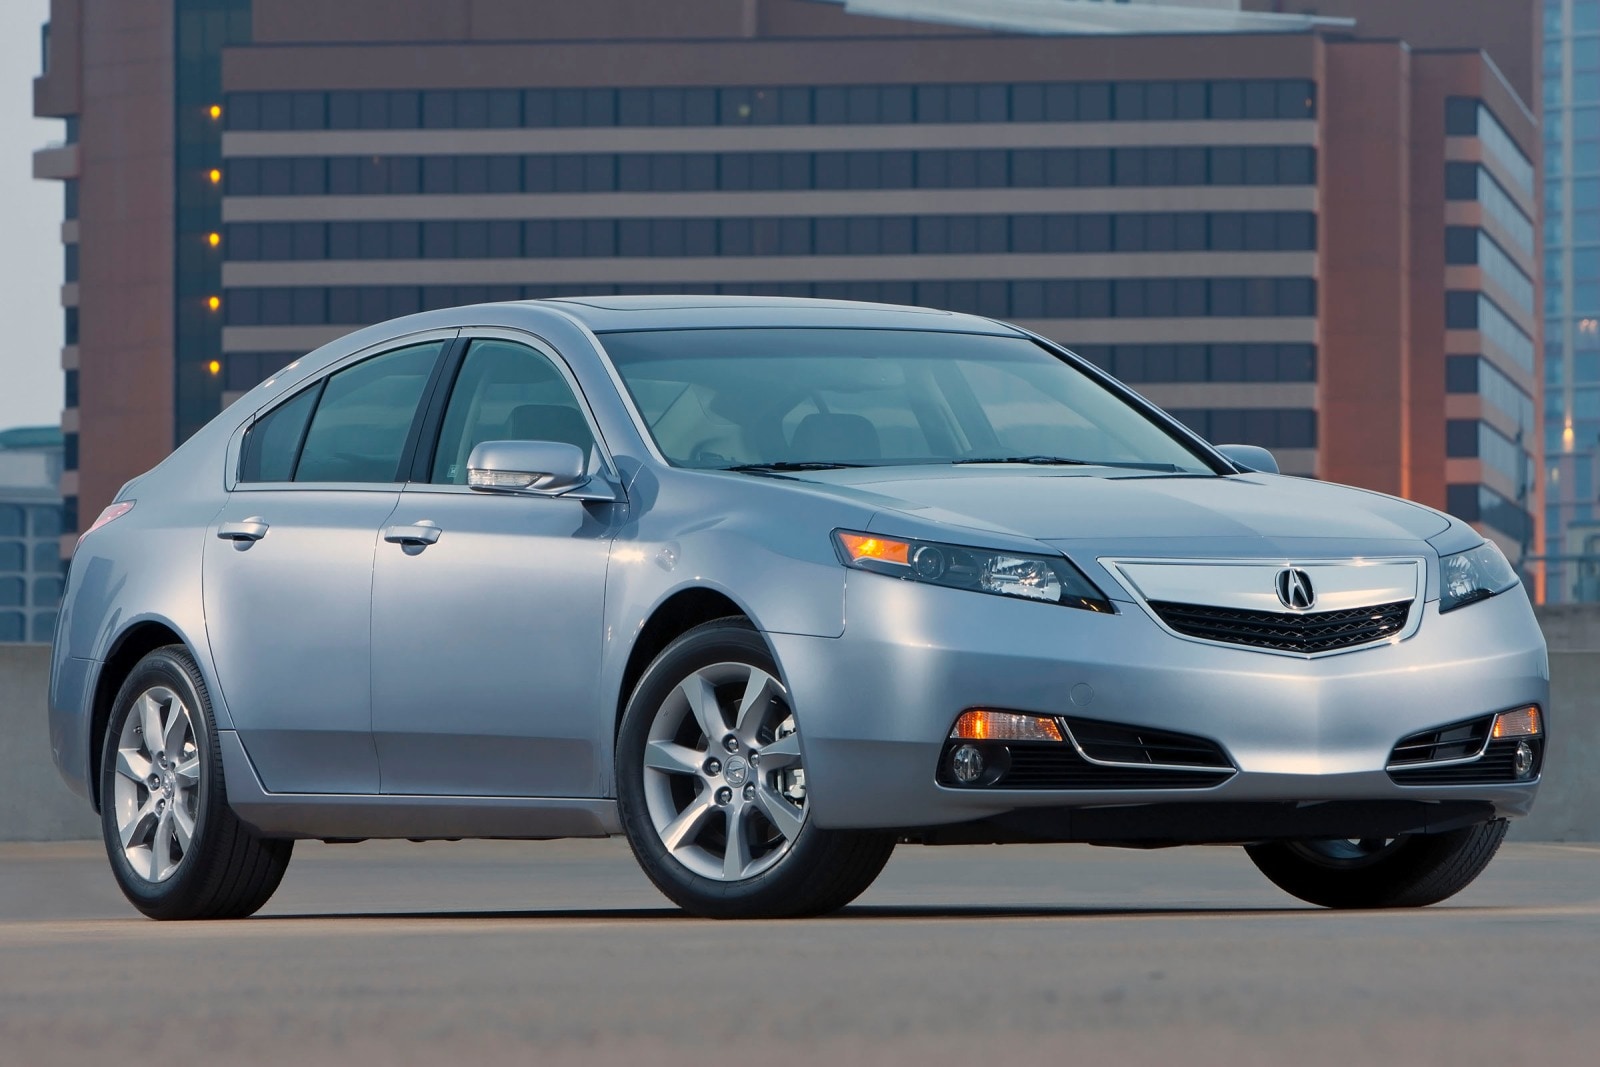 2013 Acura TL Review & Ratings | Edmunds